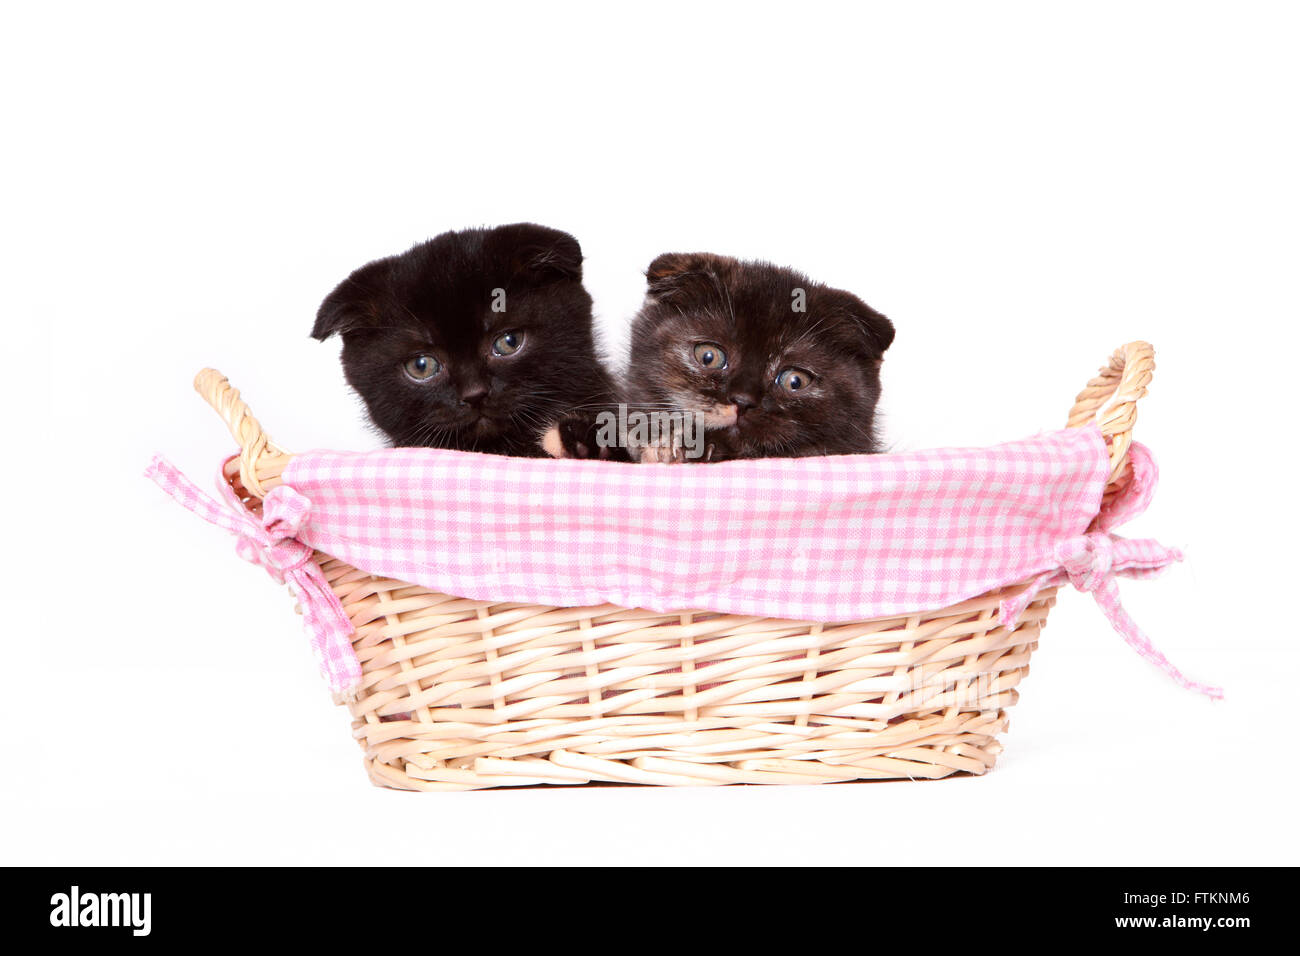 Scottish Fold. Two kittens (6 weeks old) in a wicker basket. Studio picture against a white background. Germany Stock Photo